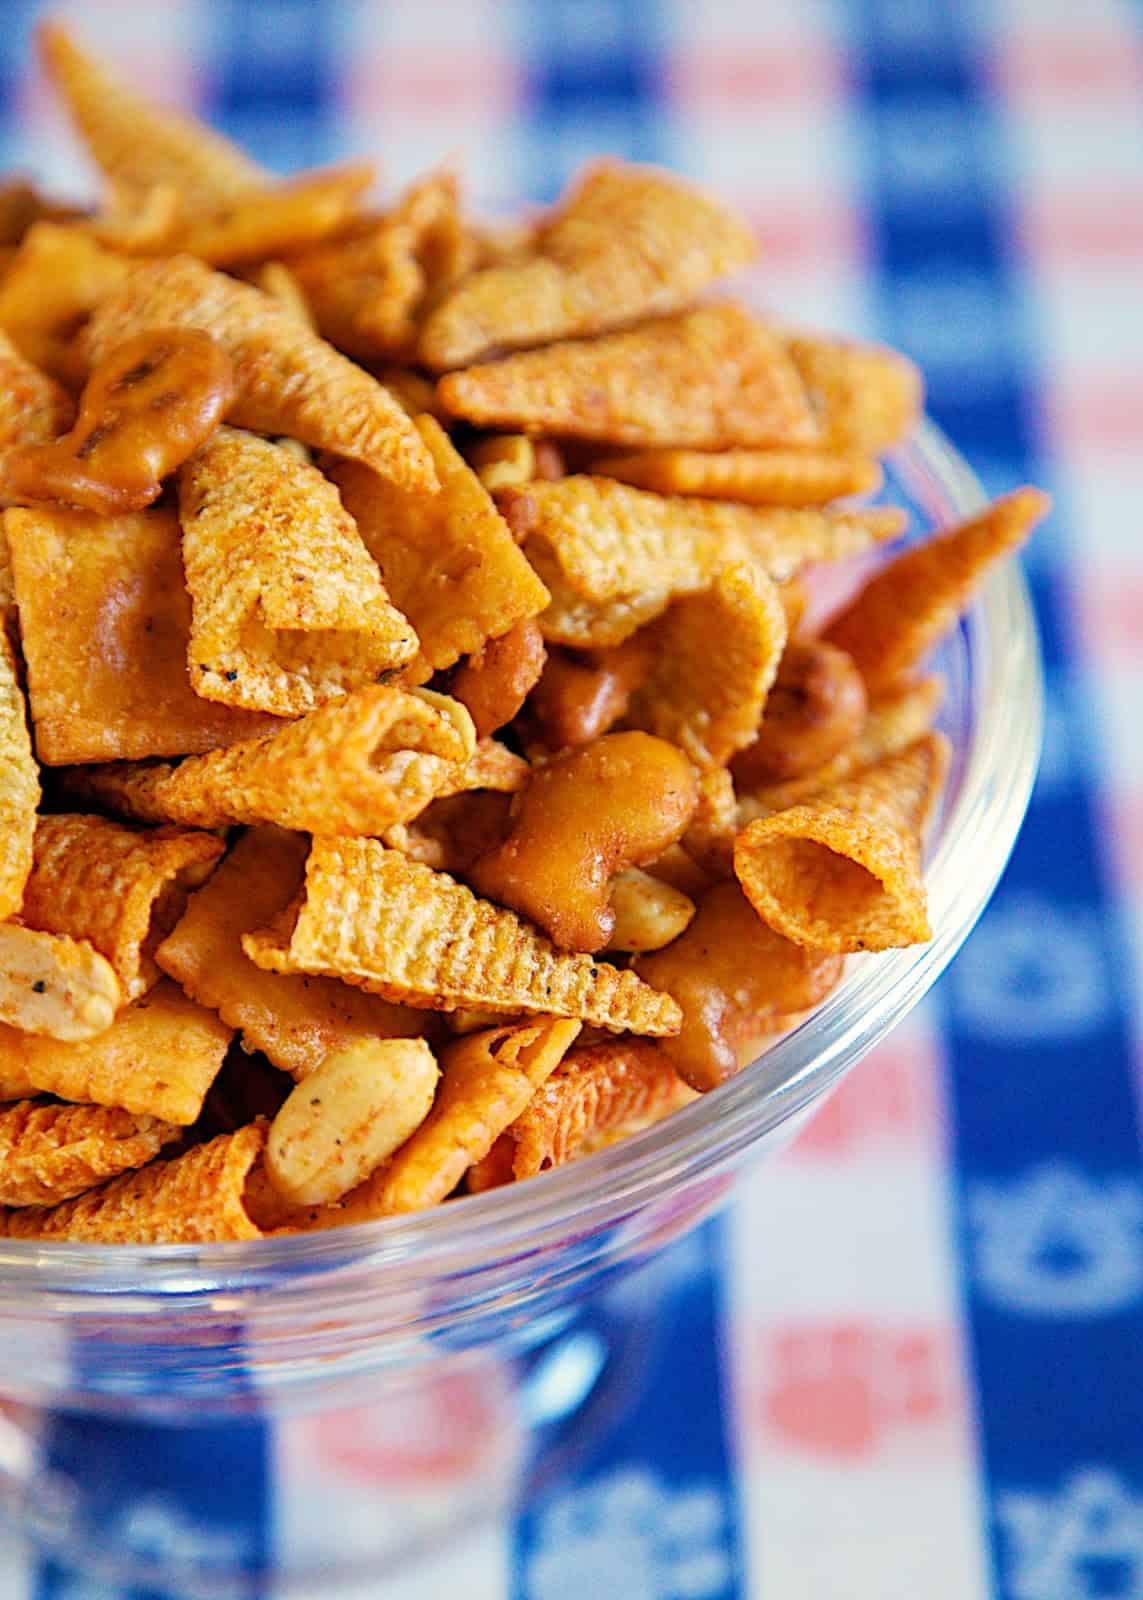 Taco Snack Mix - so addictive!! Bugles, pretzels, cheez-its, peanuts tossed in taco seasoning and oil. Great for snacking on during parties and tailgates!! Everyone RAVES about this yummy snack mix recipe!